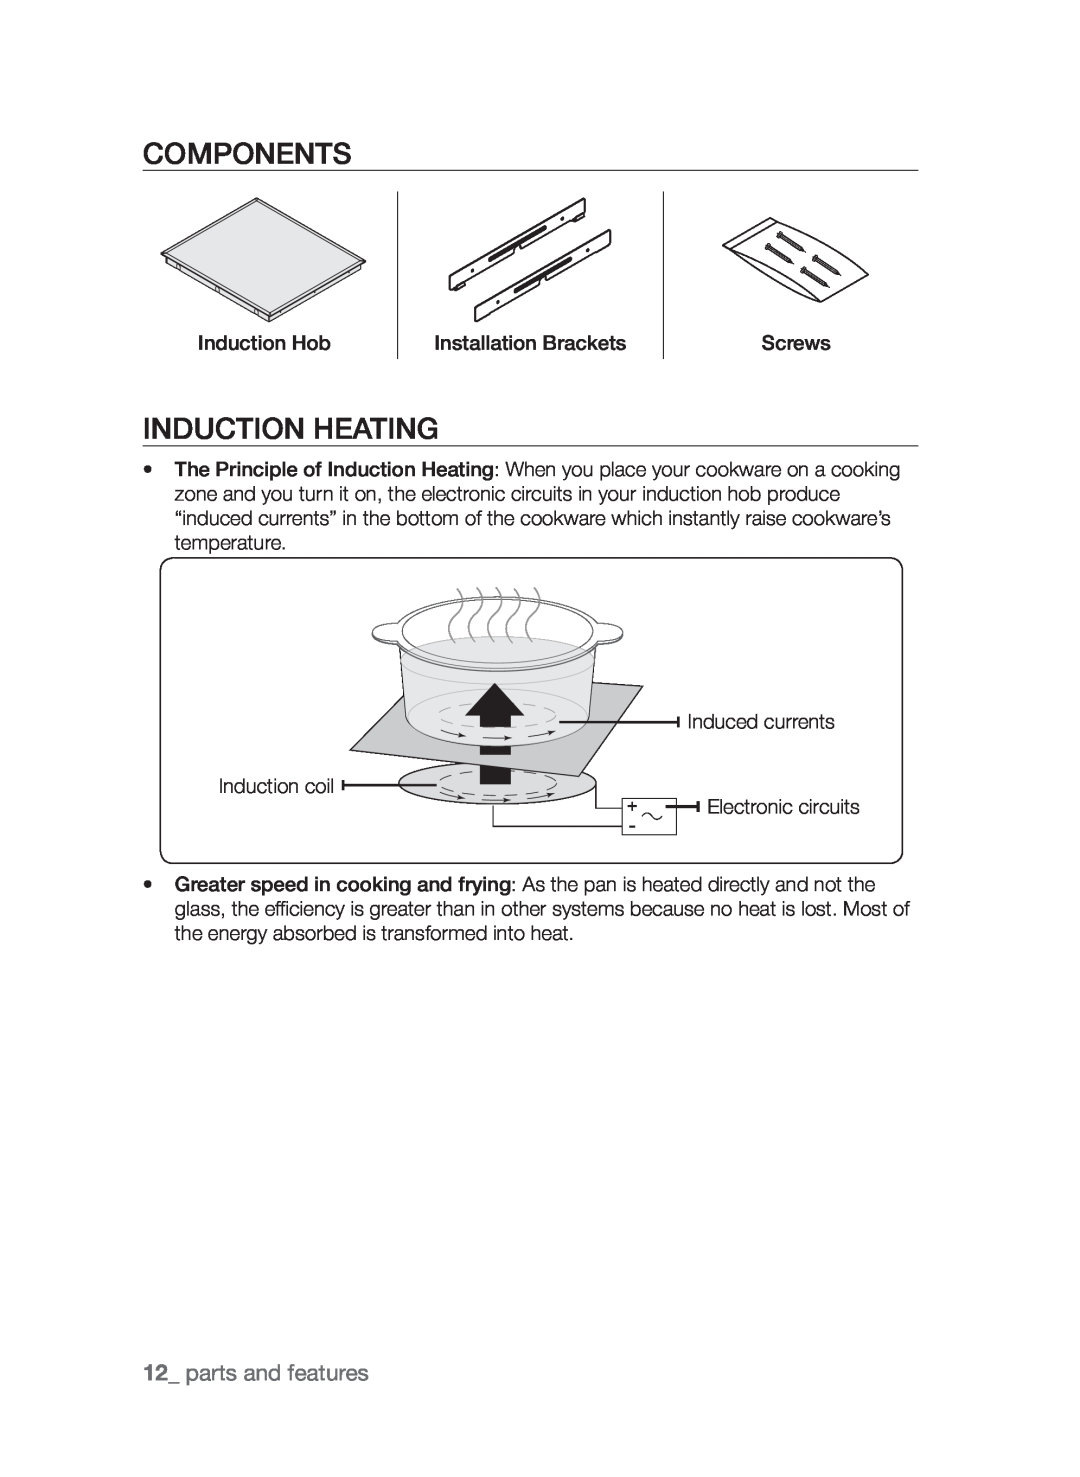 Samsung CTI613GI user manual Components, Induction heating, parts and features 